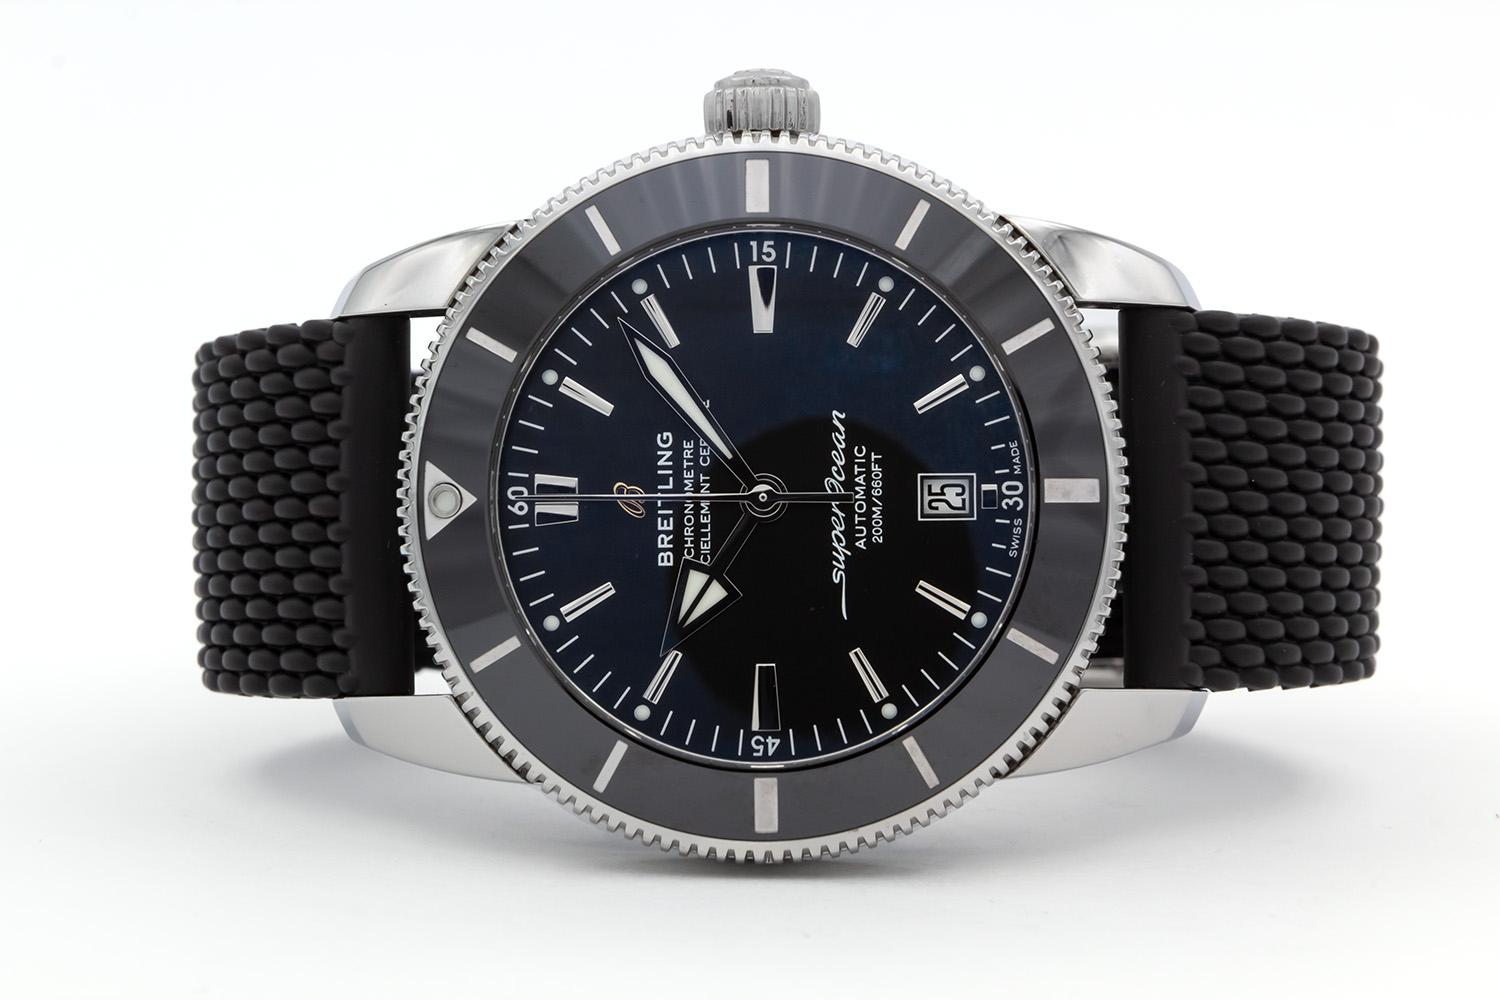 We are pleased to offer this 2019 Breitling SuperOcean Heritage II B20 AB2020. This is the second generation Superocean Heritage which features the Breitling B20 automatic movement with power reserve, 46mm stainless steel case, black ceramic